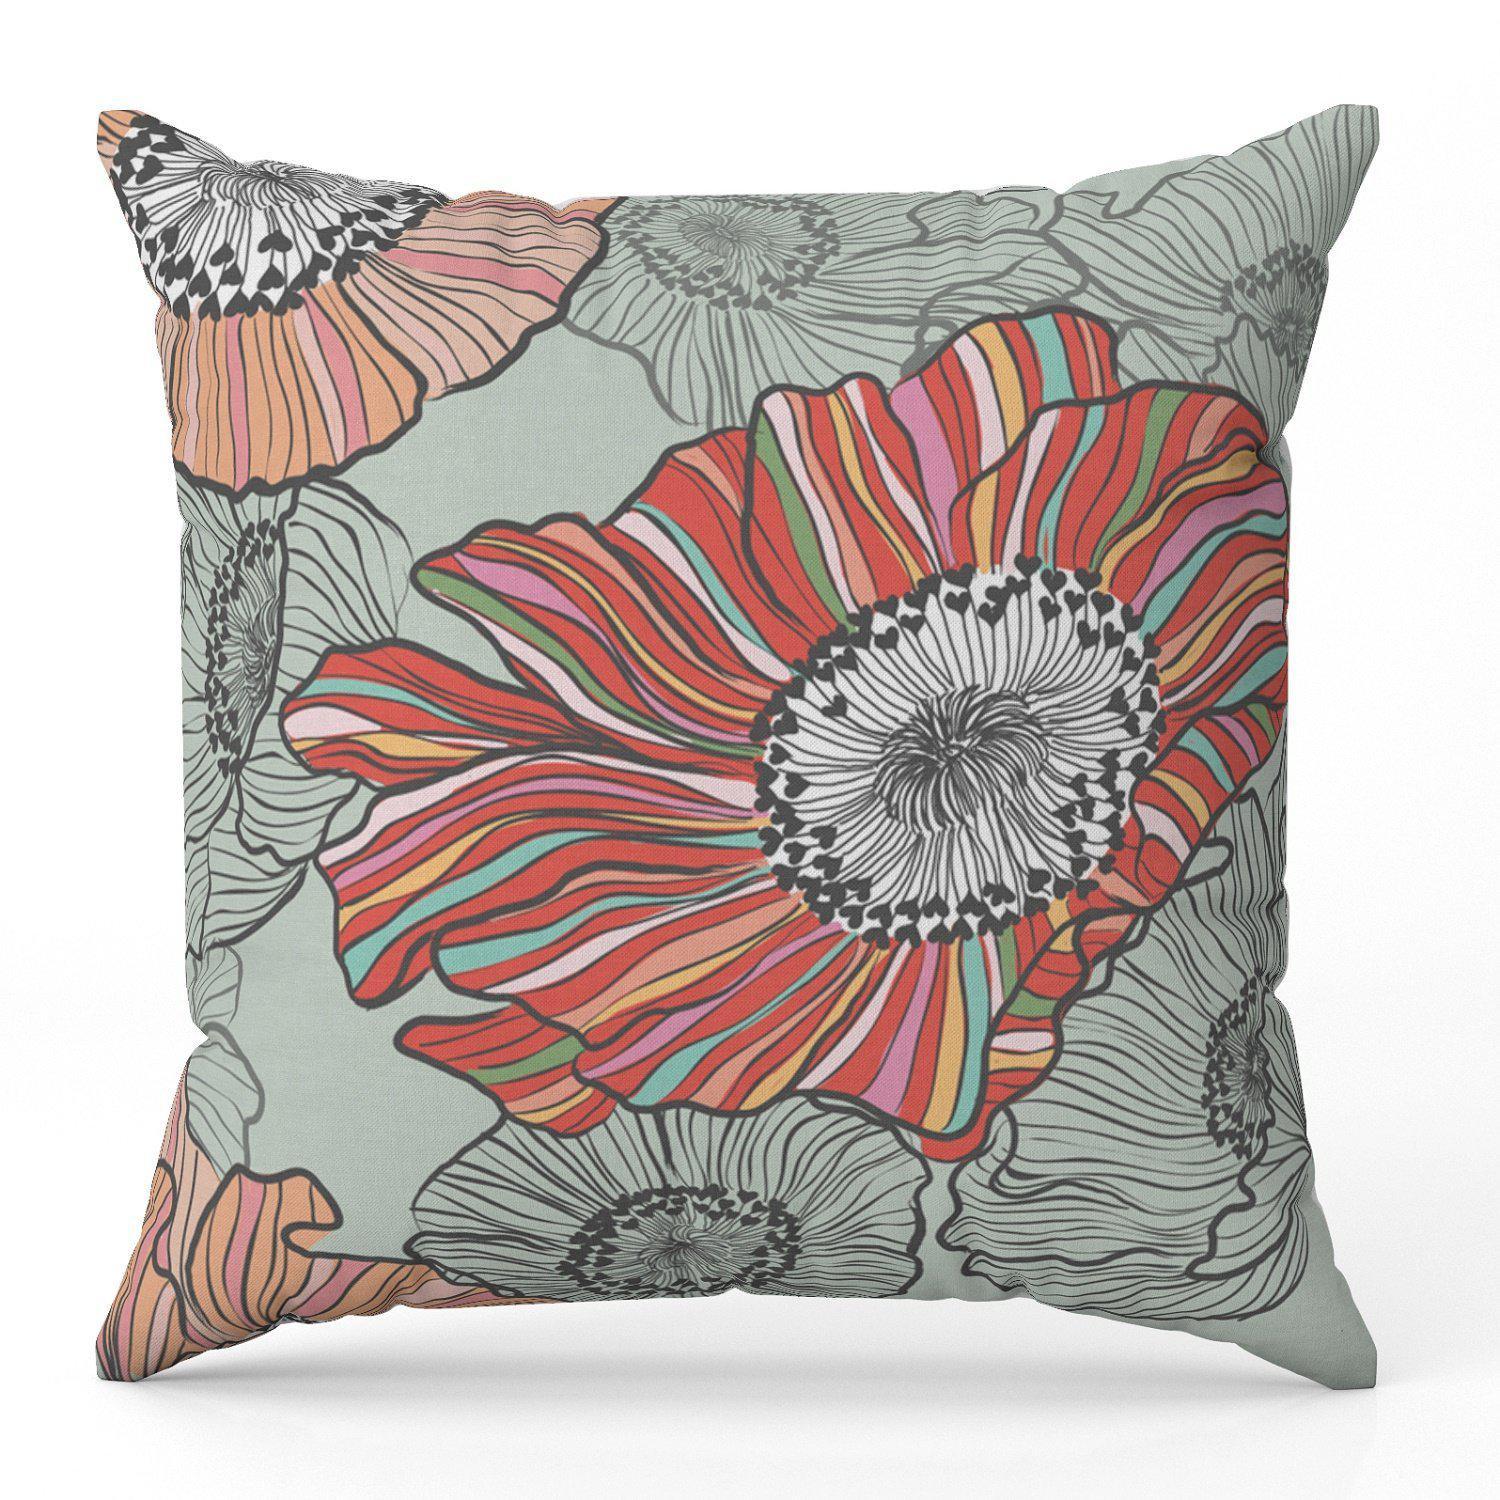 Candy Stripe Poppies (Green) - Funky Art Cushion - Paradise Garden - House Of Turnowsky Pillows - Handmade Cushions UK - WeLoveCushions